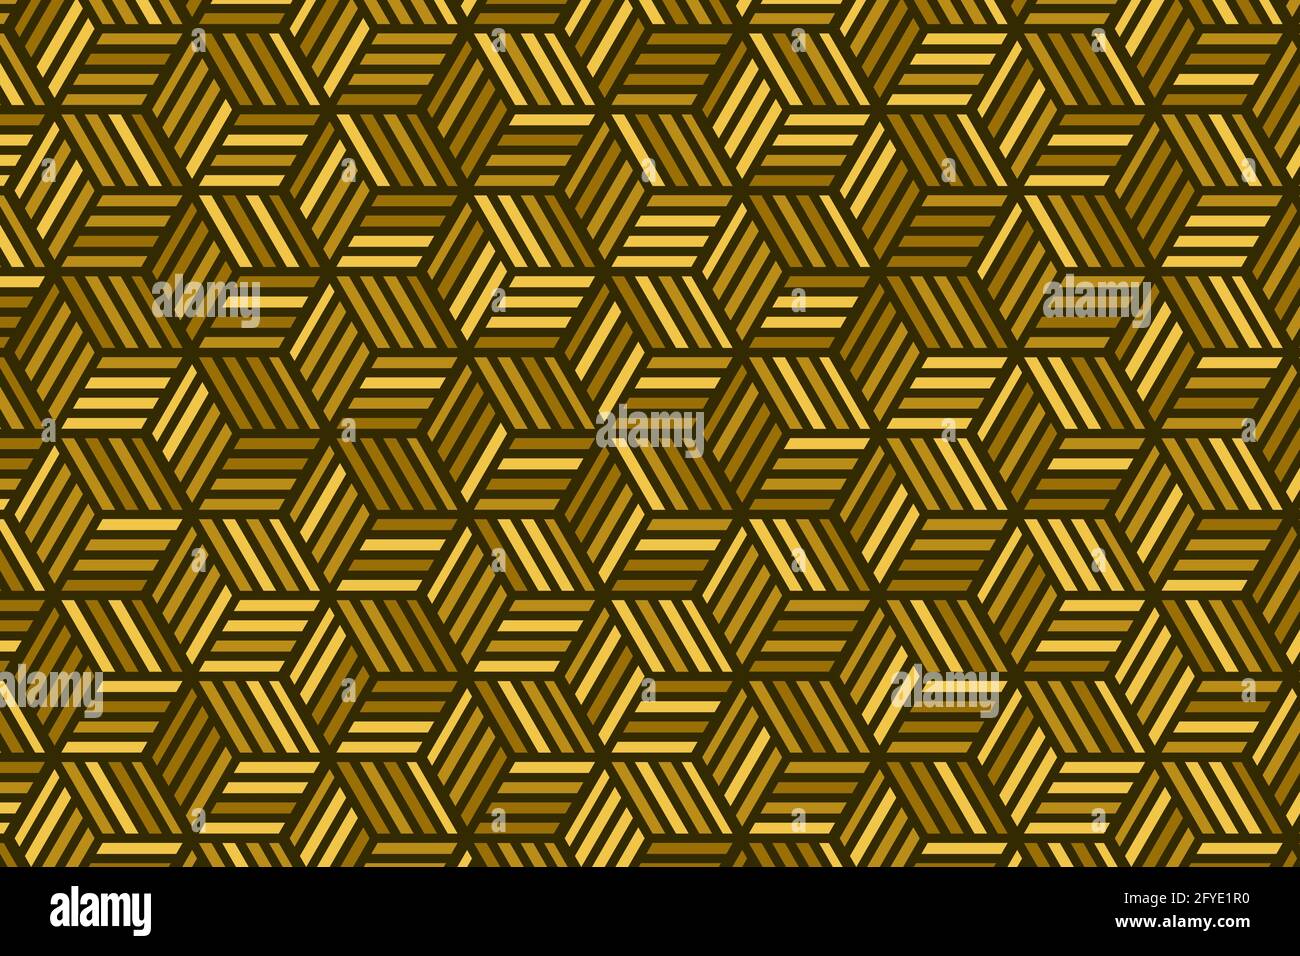 Abstract gold geometric seamless pattern design modern. Luxury  background with golden stripes for,decorative,carpet,wallpaper,clothing,wrapping,batik Stock Vector